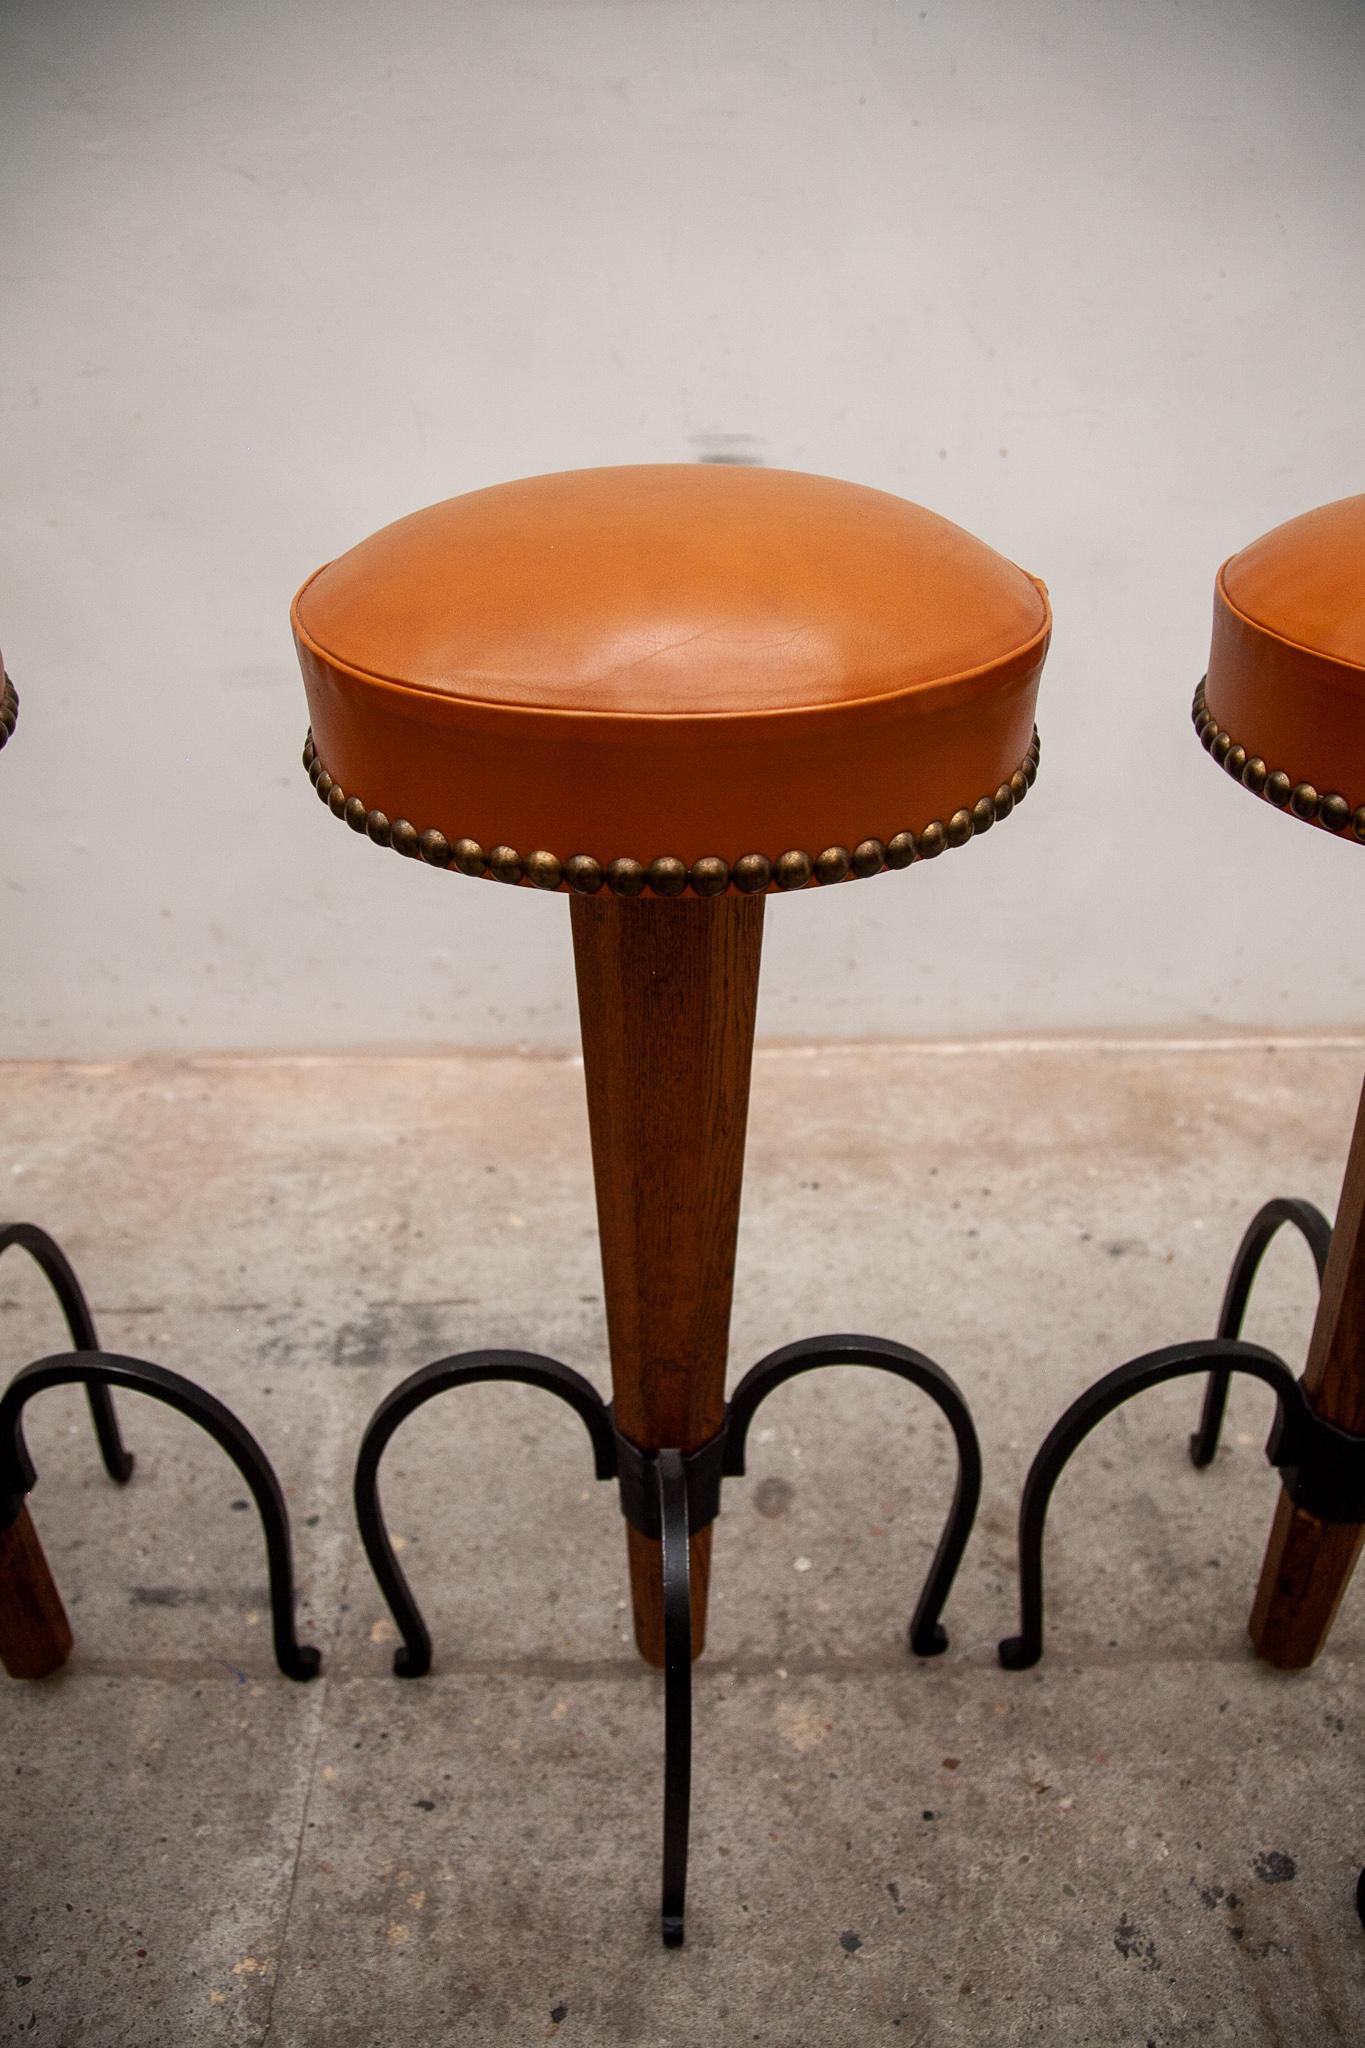 Set of four Brutalist Stools Wrought Iron, Round Camel Leather Seats 4